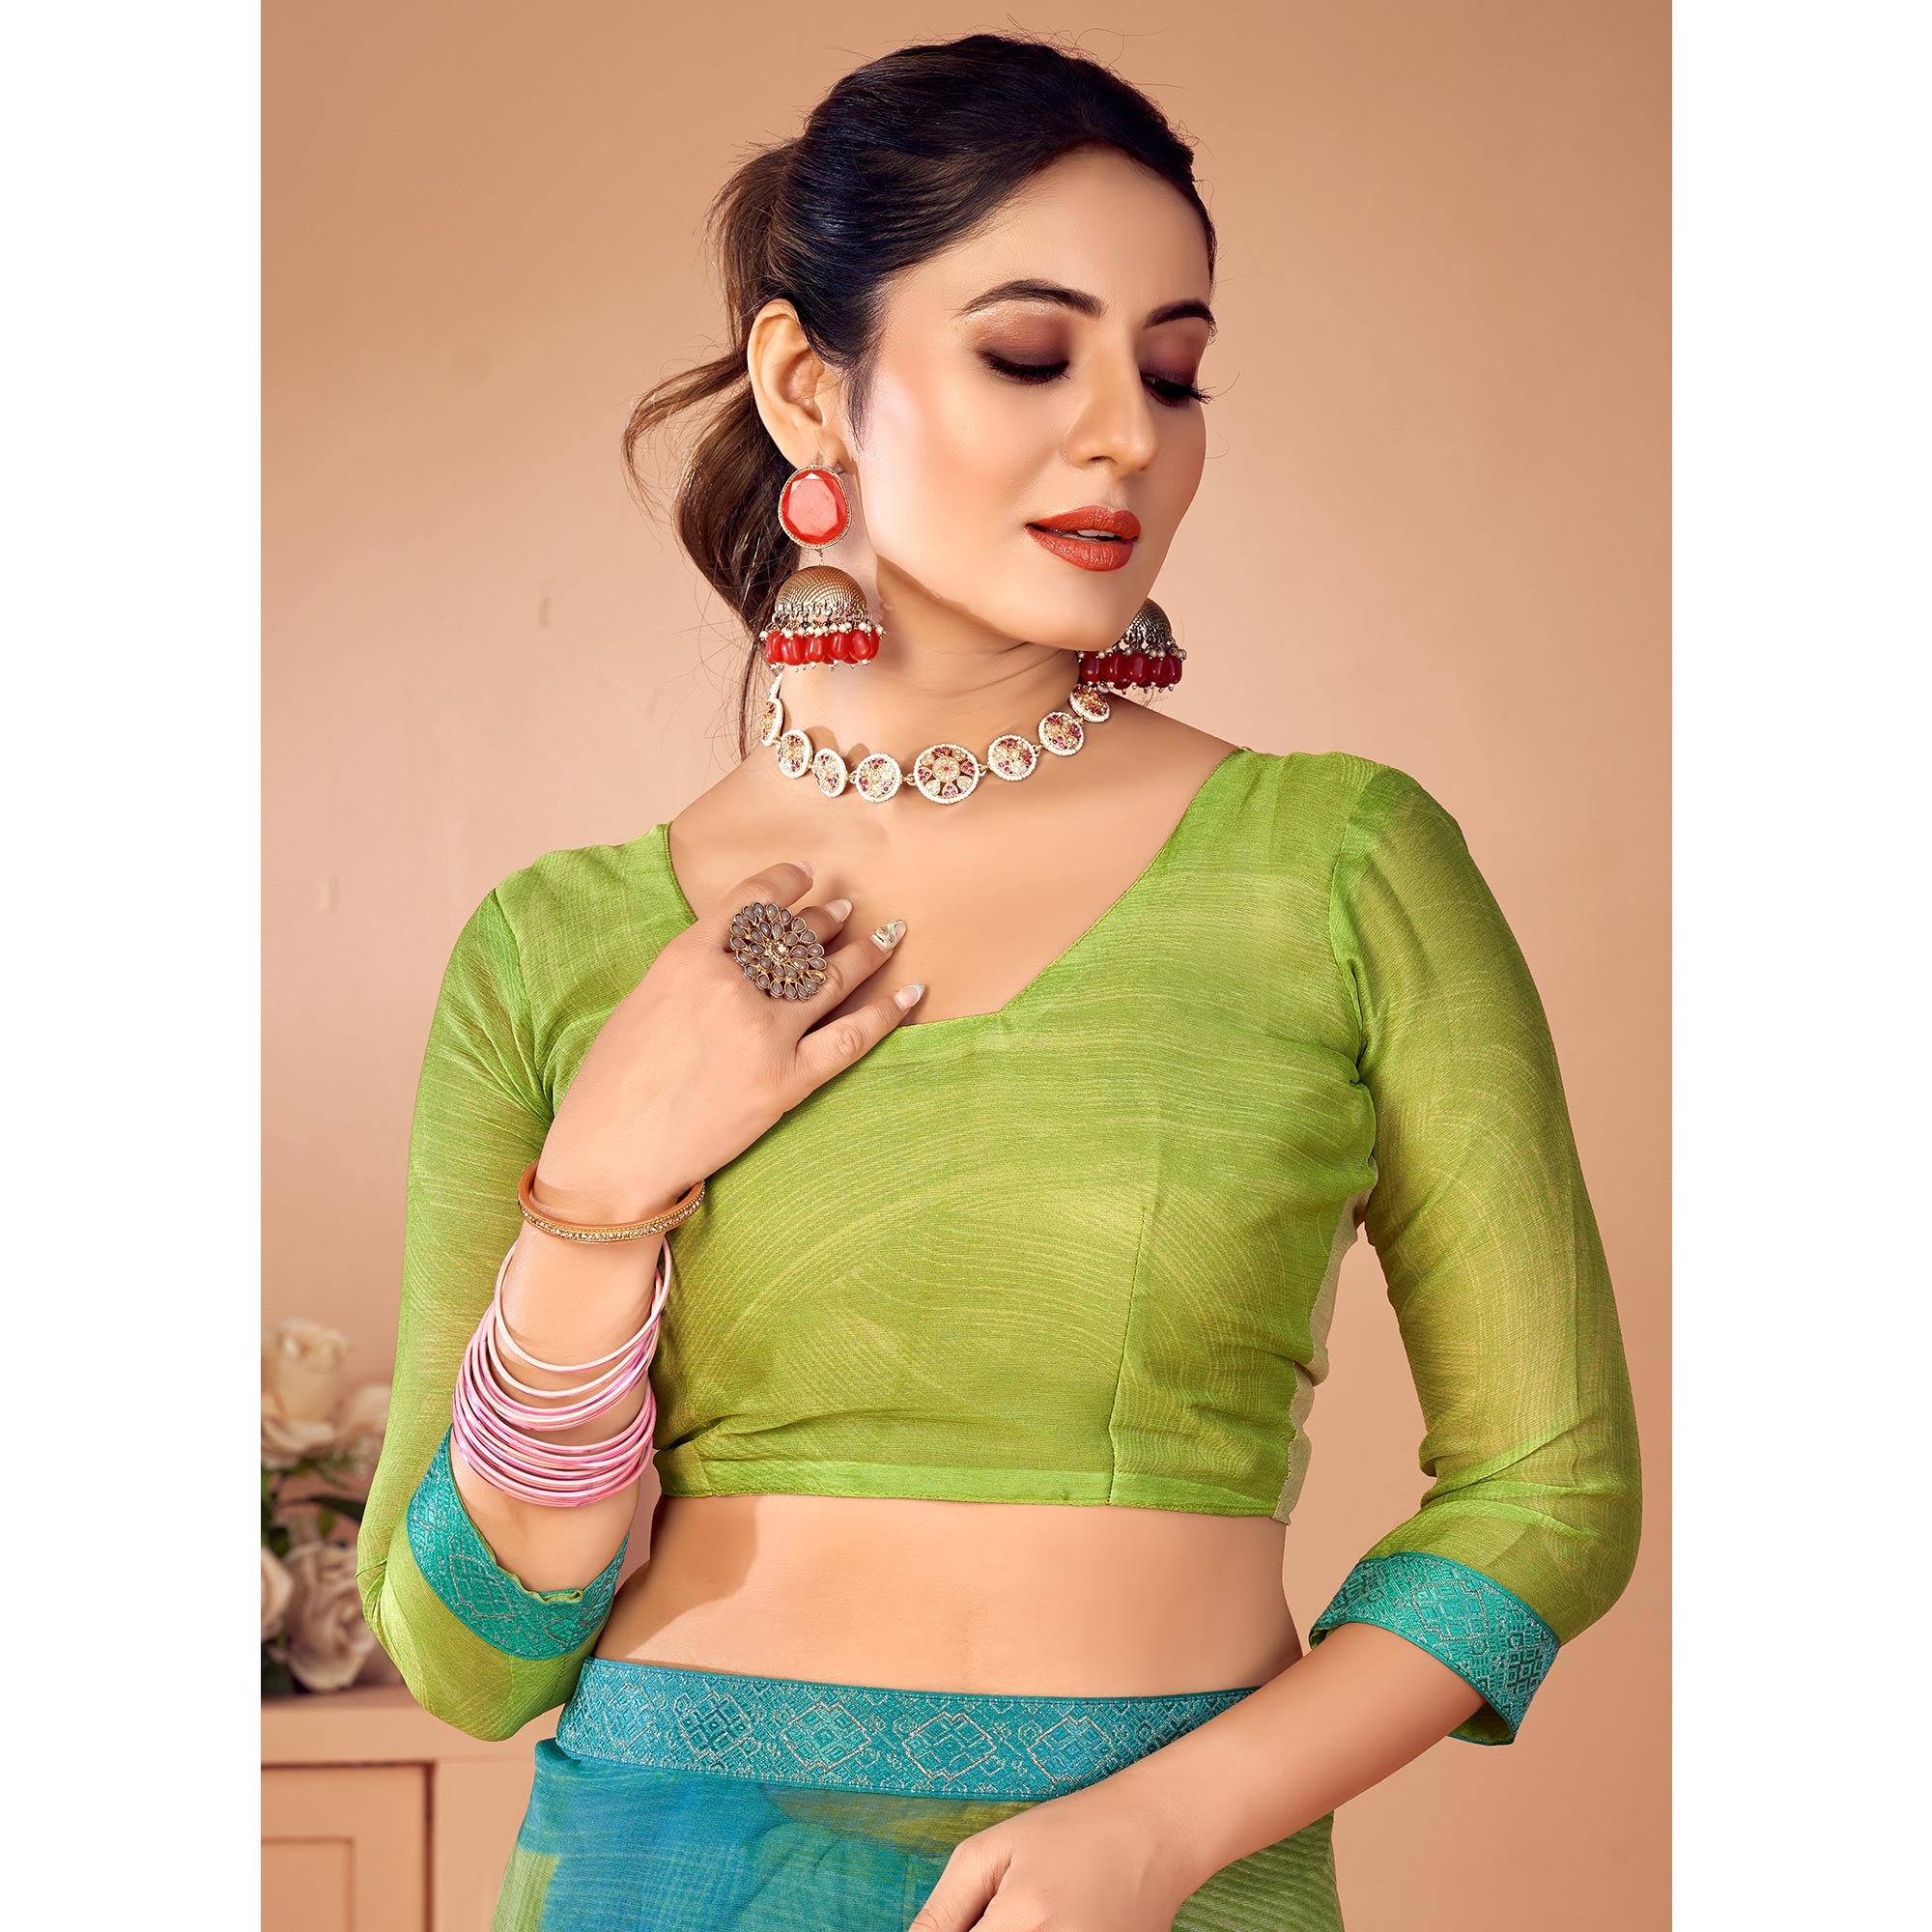 Green & Turquoise Printed Chiffon Saree With Lace Border